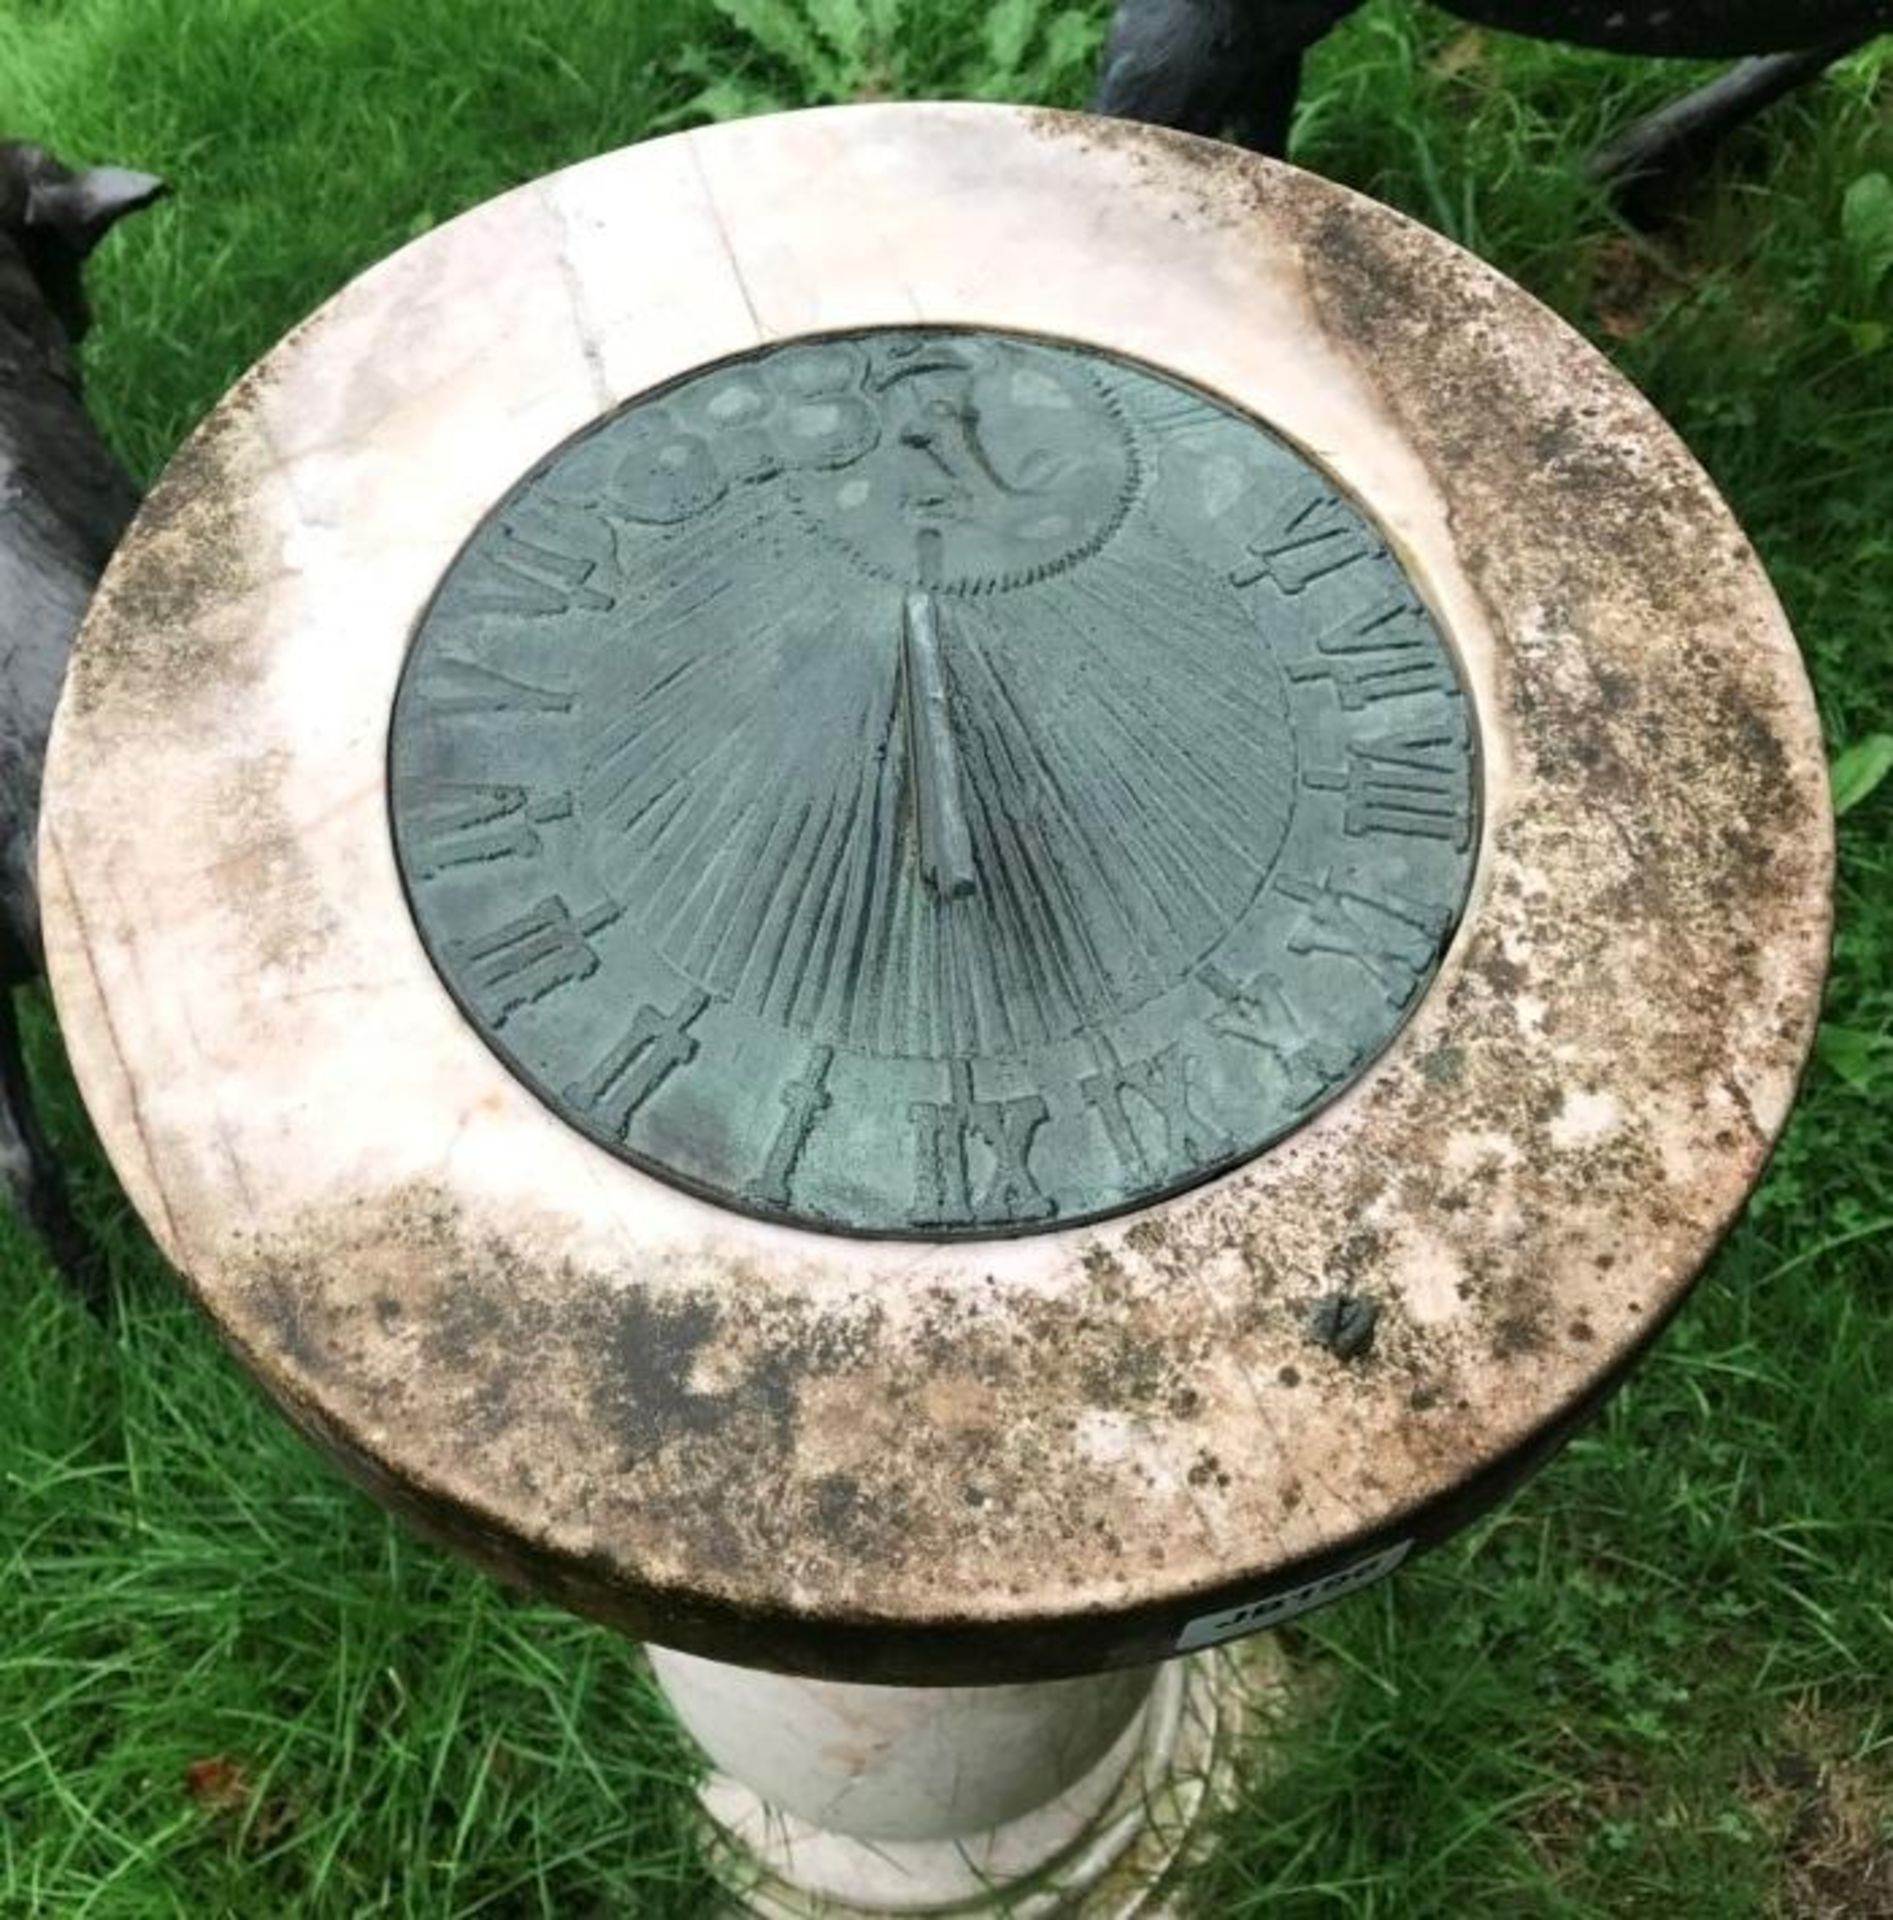 1 x Solstice Stone Sundial Shaped Pedestal With Dial Plate - Measurements Height 84cm x Diameter - Image 6 of 8